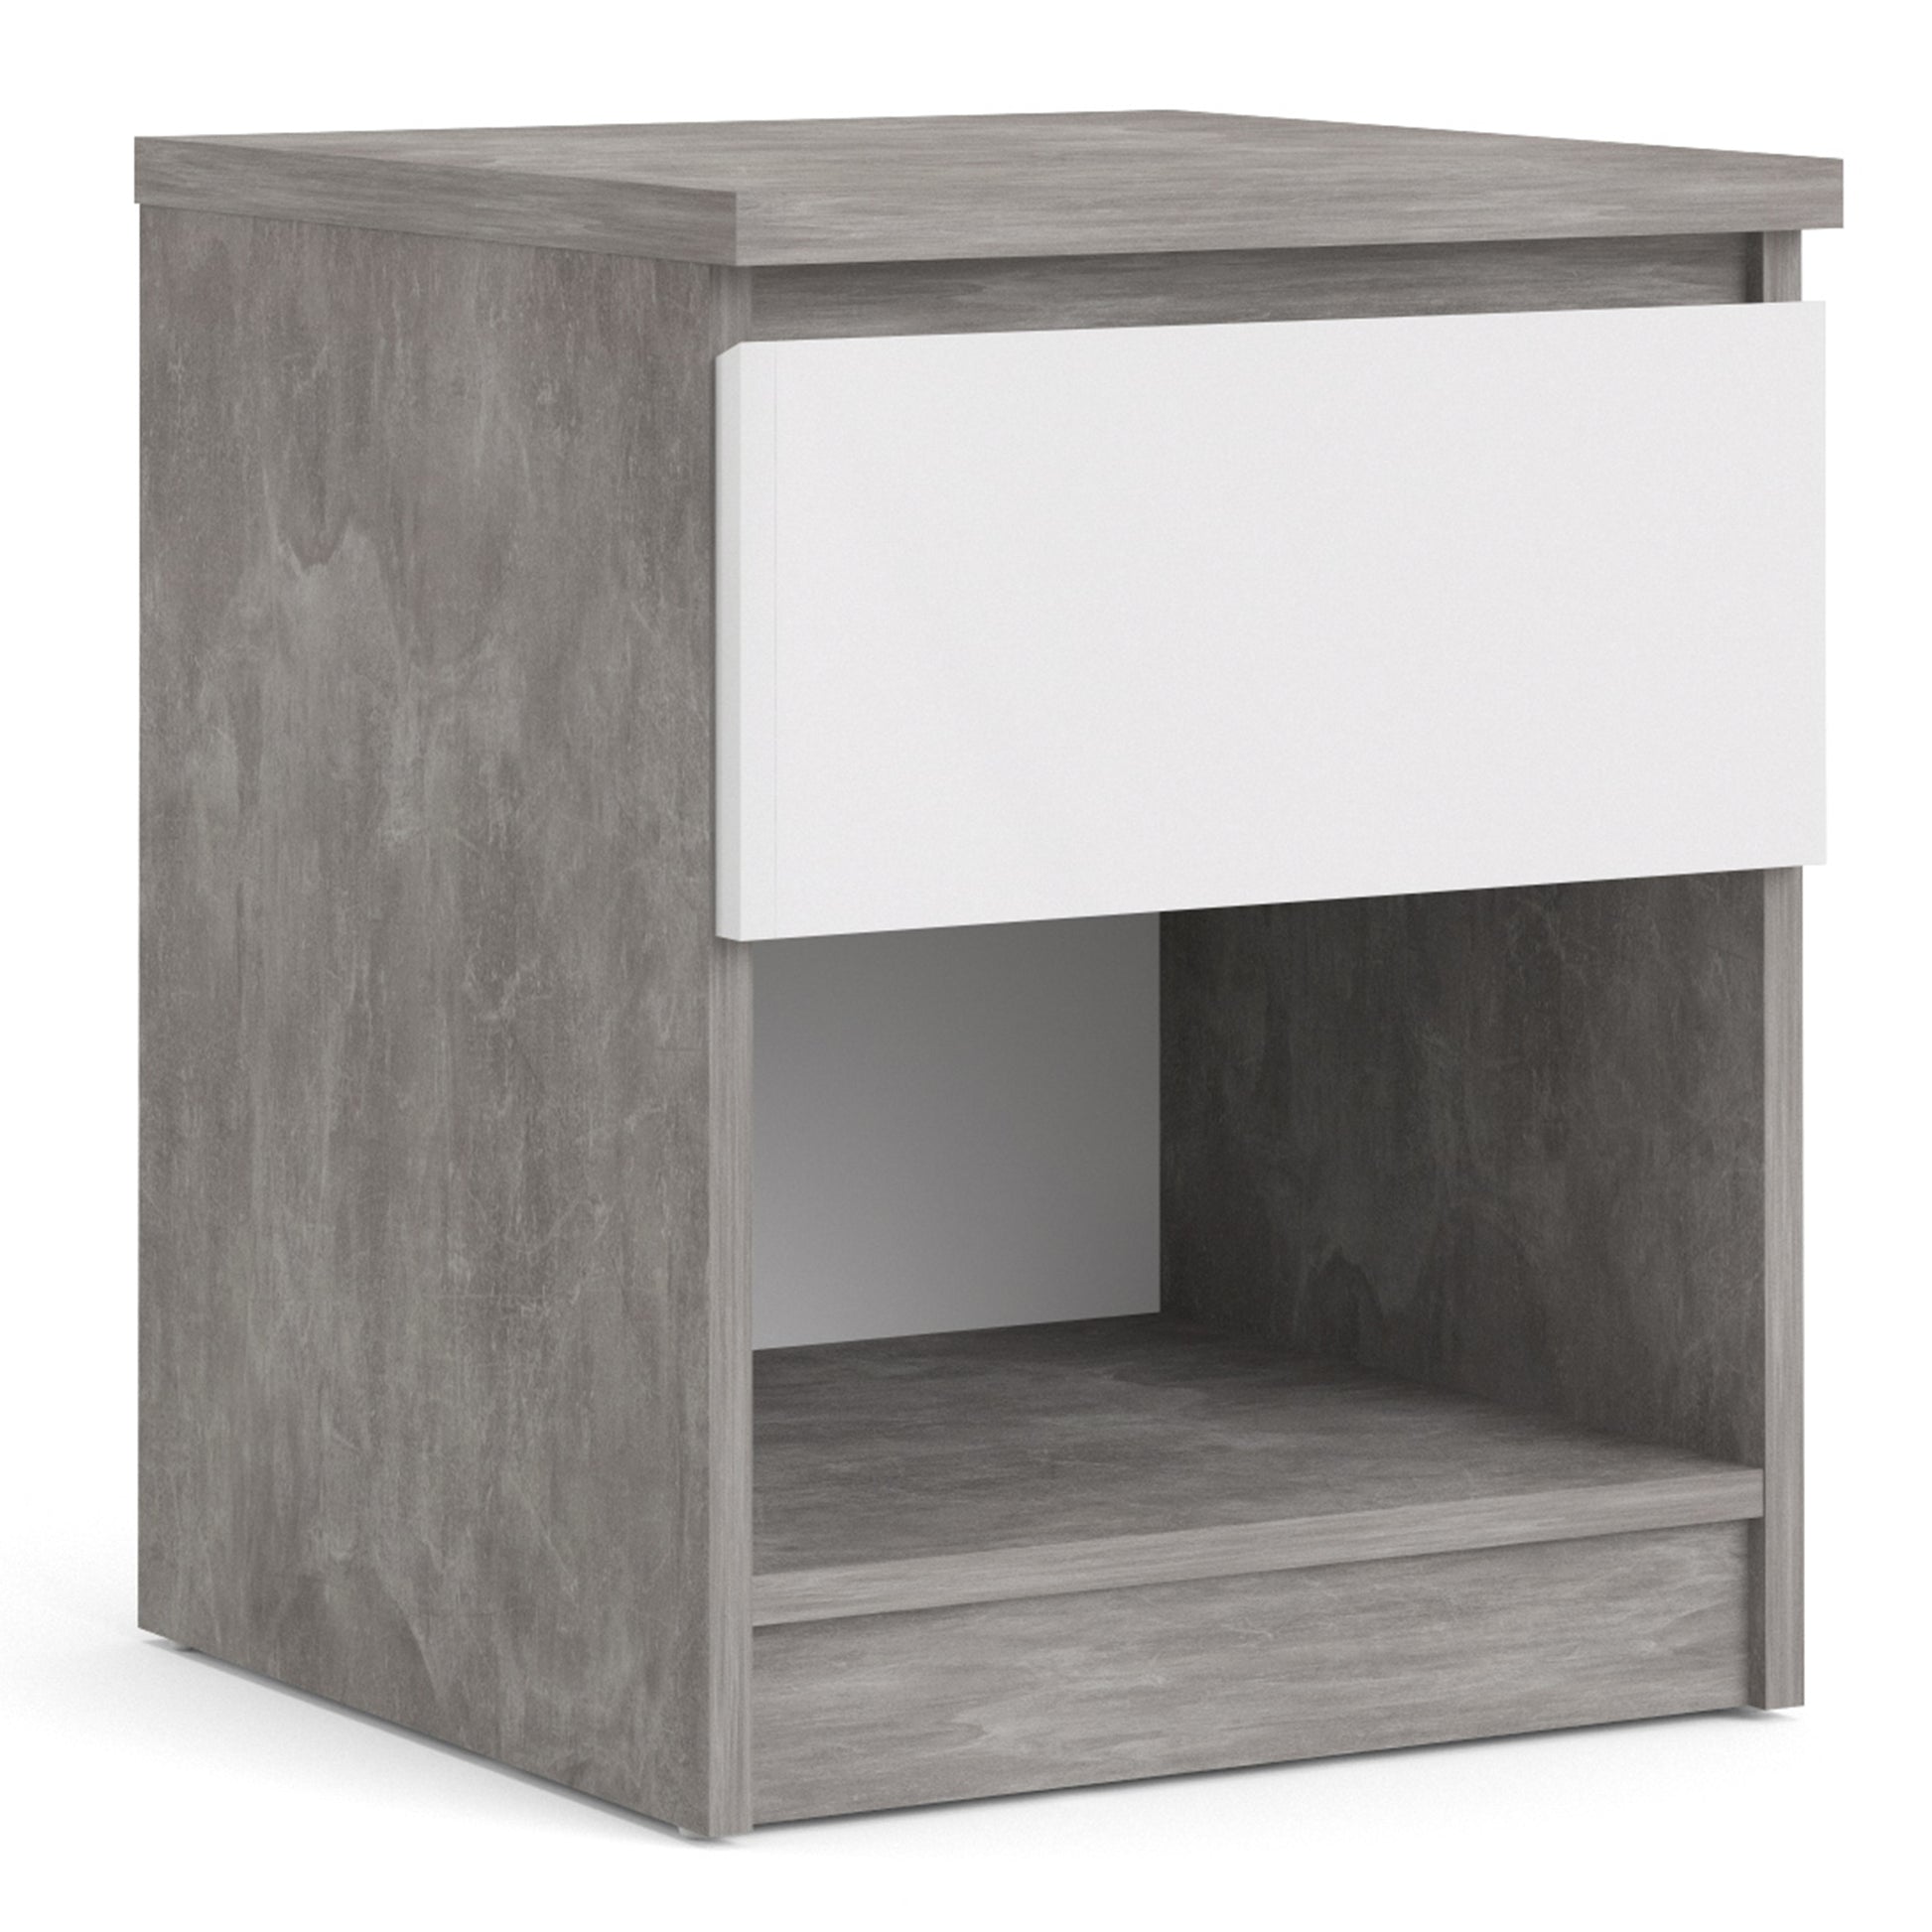 Naia  Bedside 1 Drawer 1 Shelf in Concrete and White High Gloss